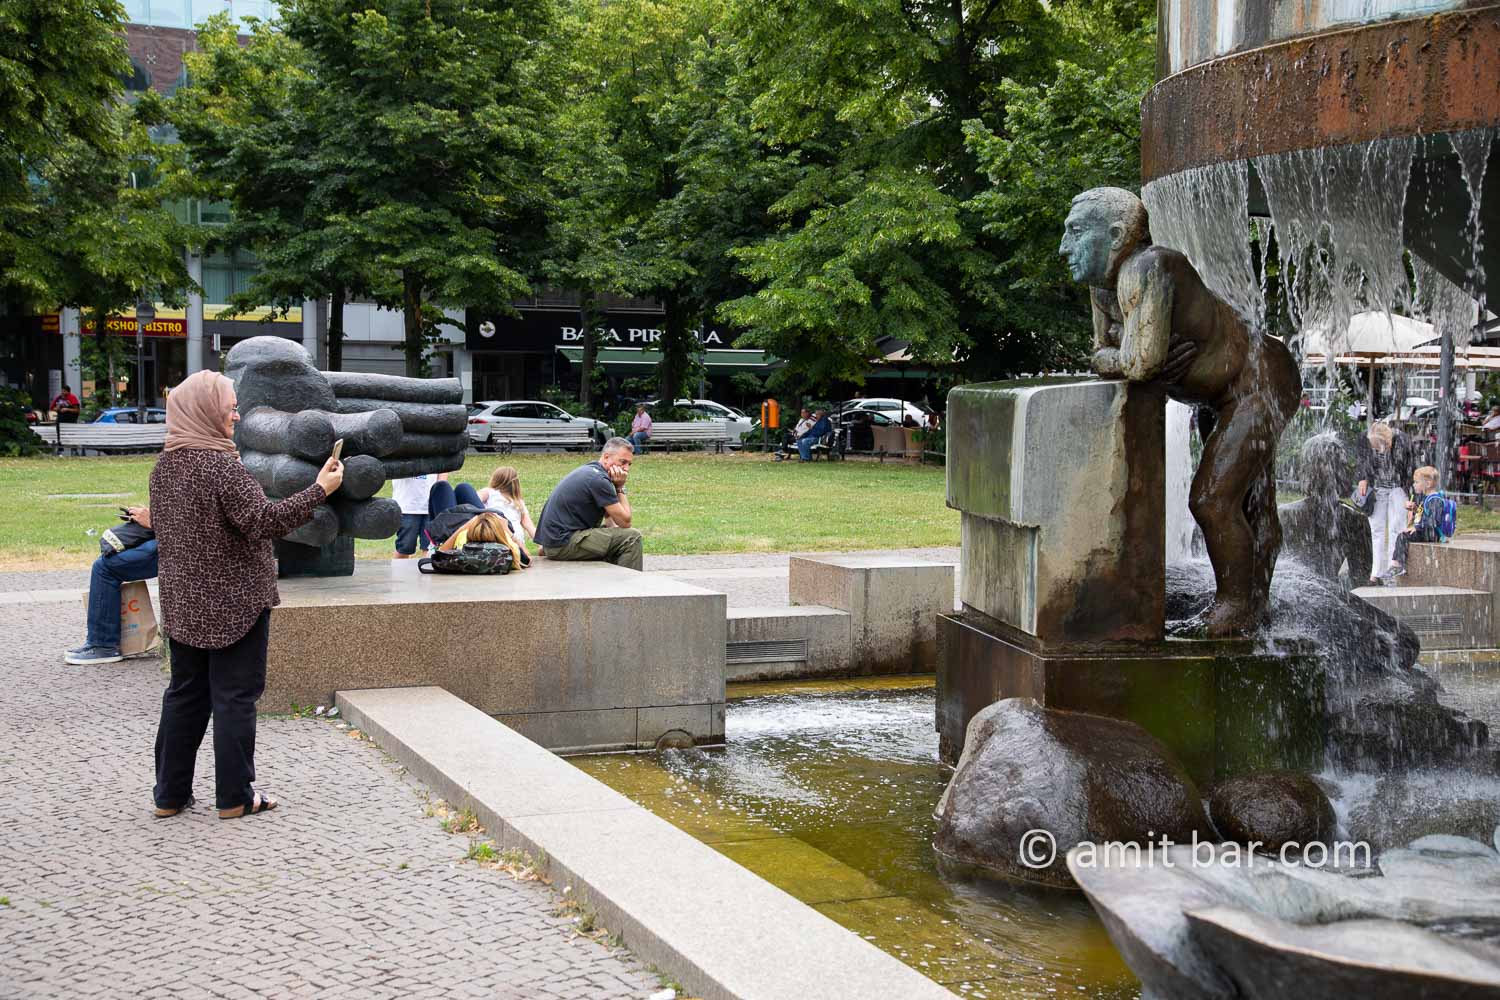 Can I help, you, Miss?: A woman is taking a photo of sculpture